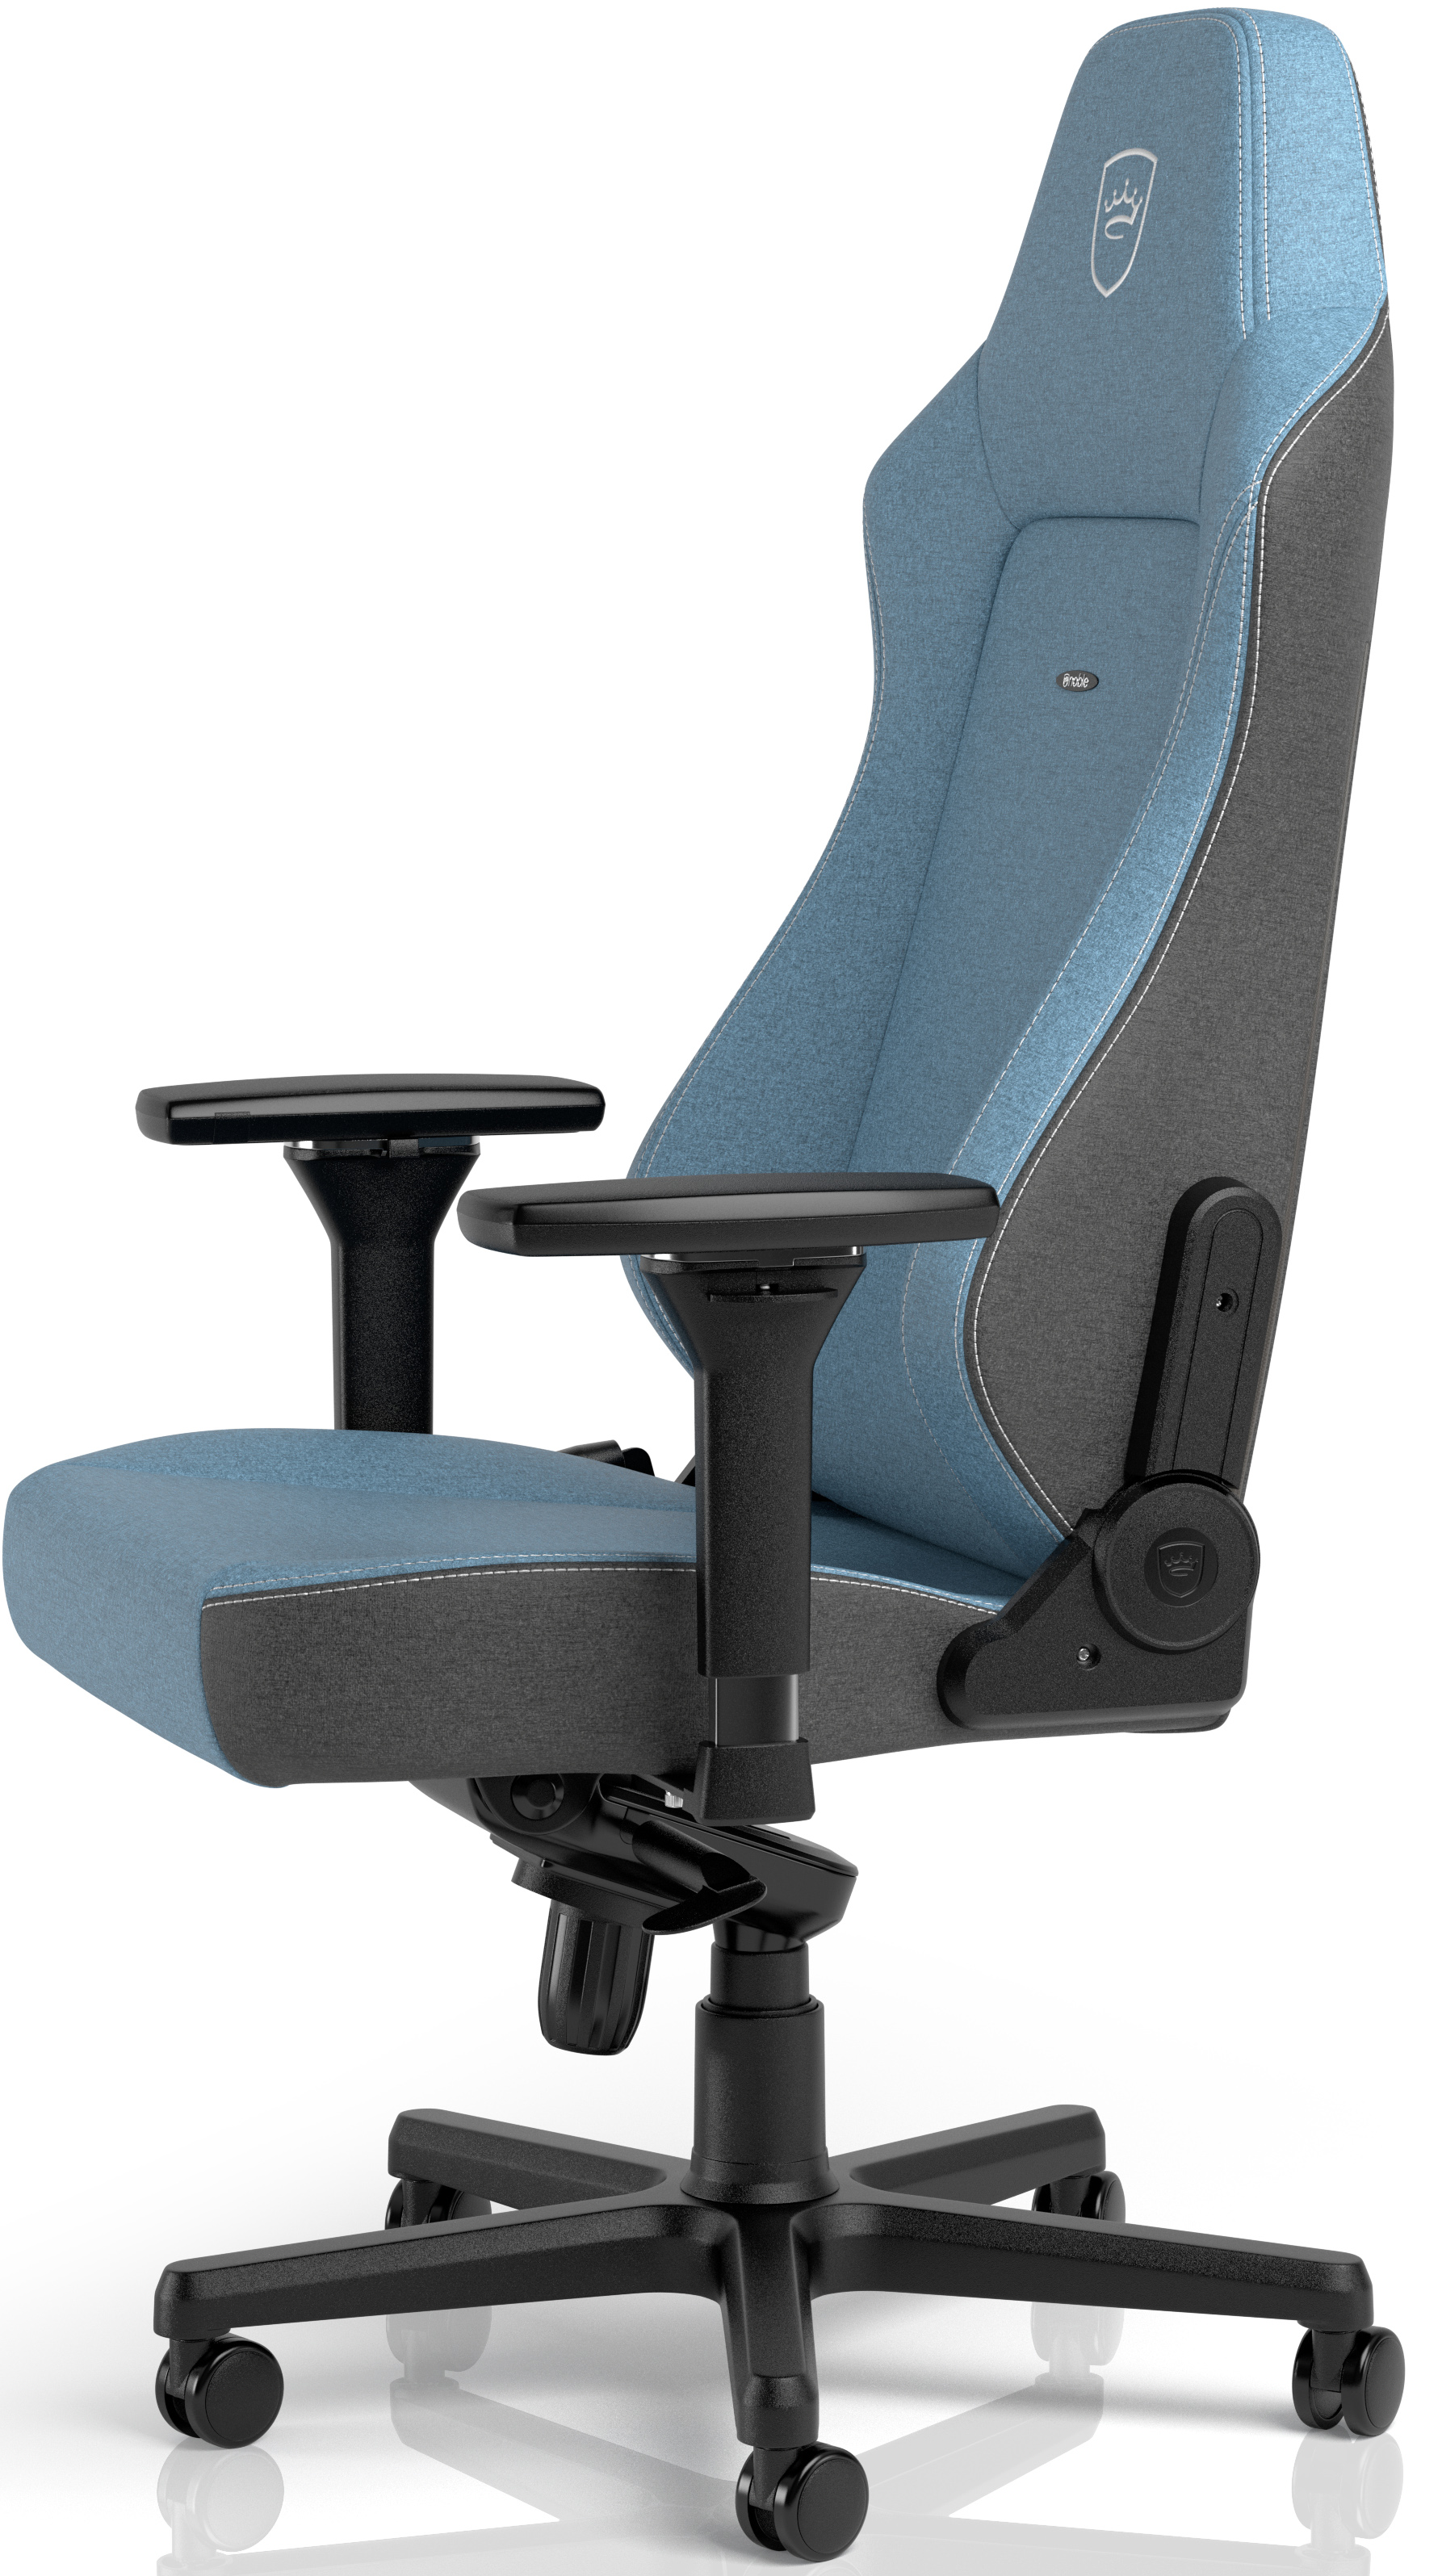 noblechairs - ** B Grade ** Silla noblechairs Hero Two Tone - Blue Limited Edition